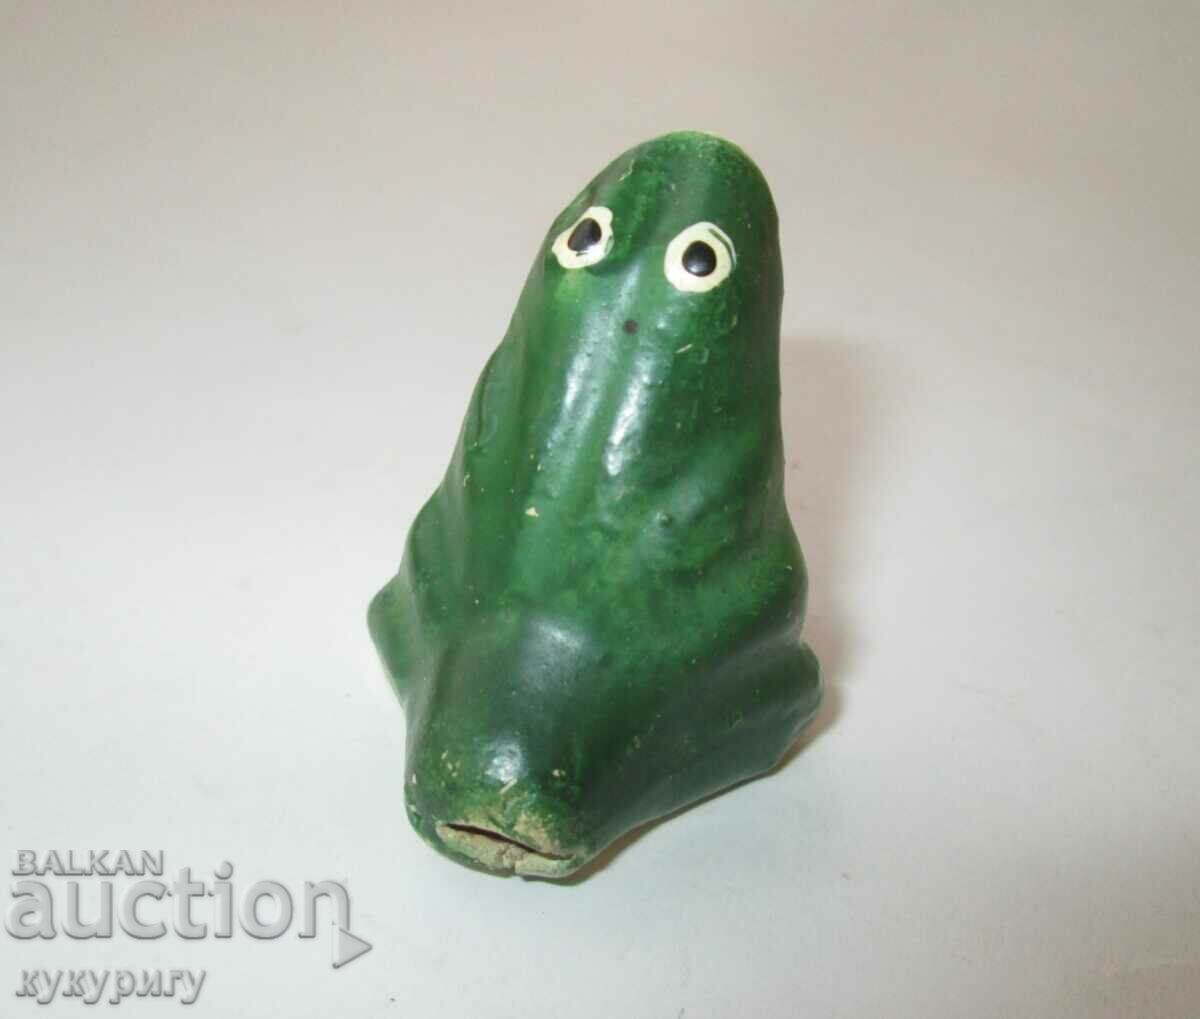 Old ceramic clay whistle toy figurine Frog